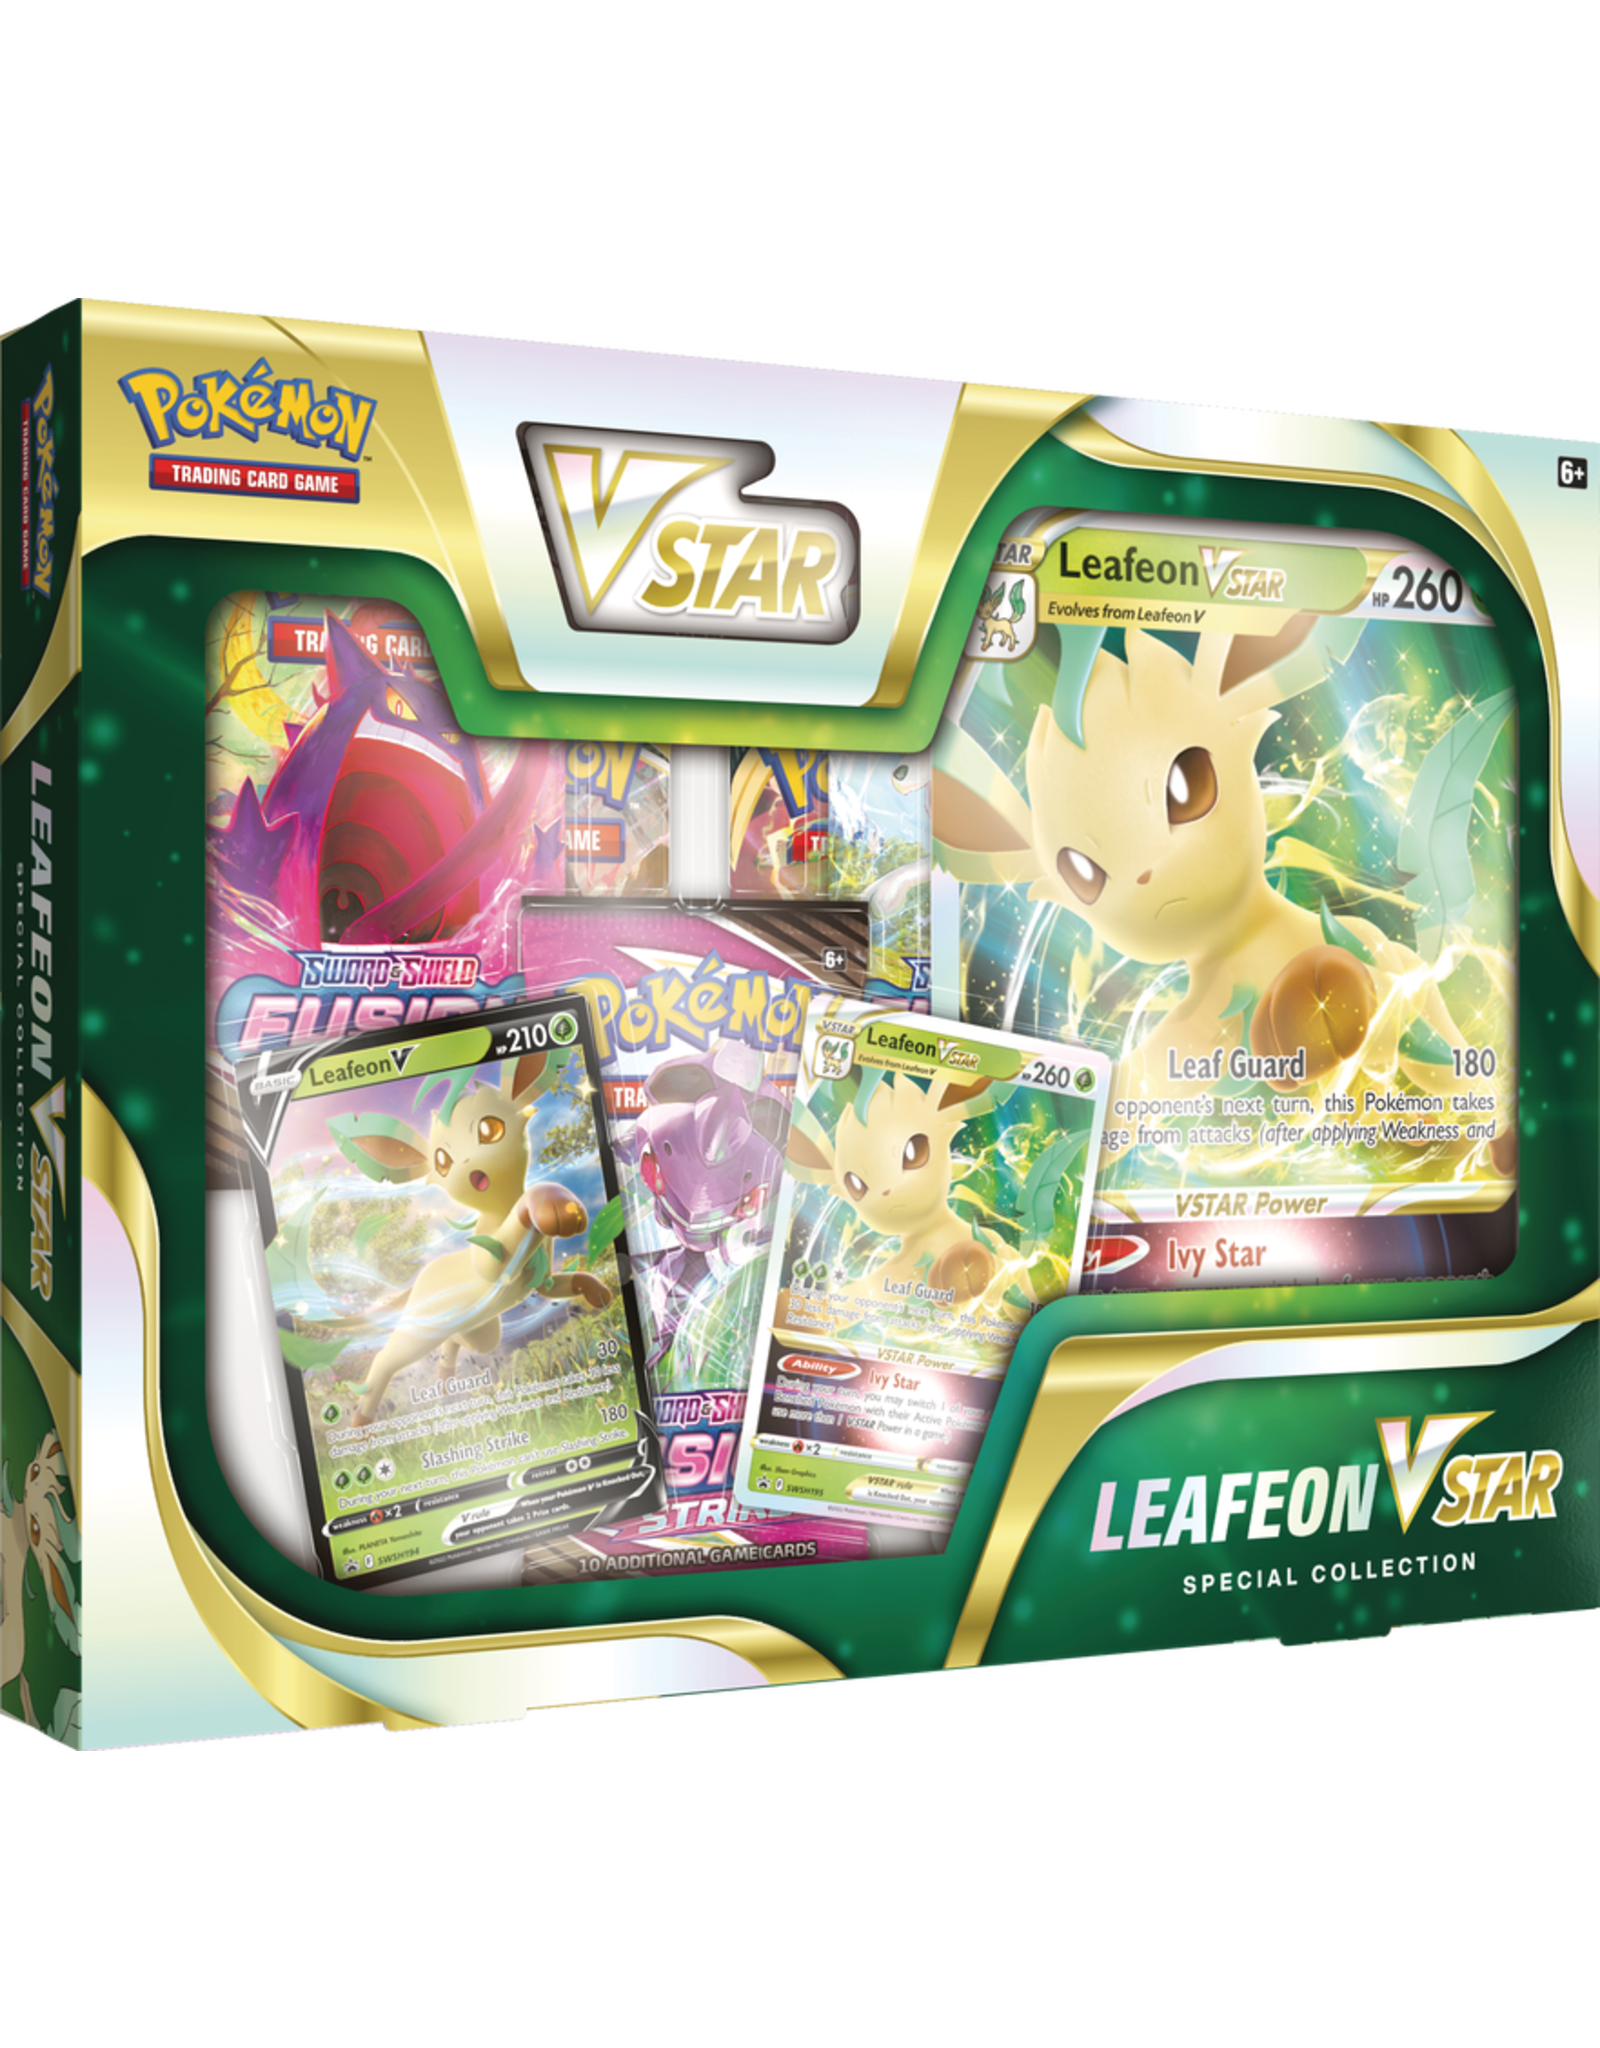 Pokemon Leafeon V Star Special Collection